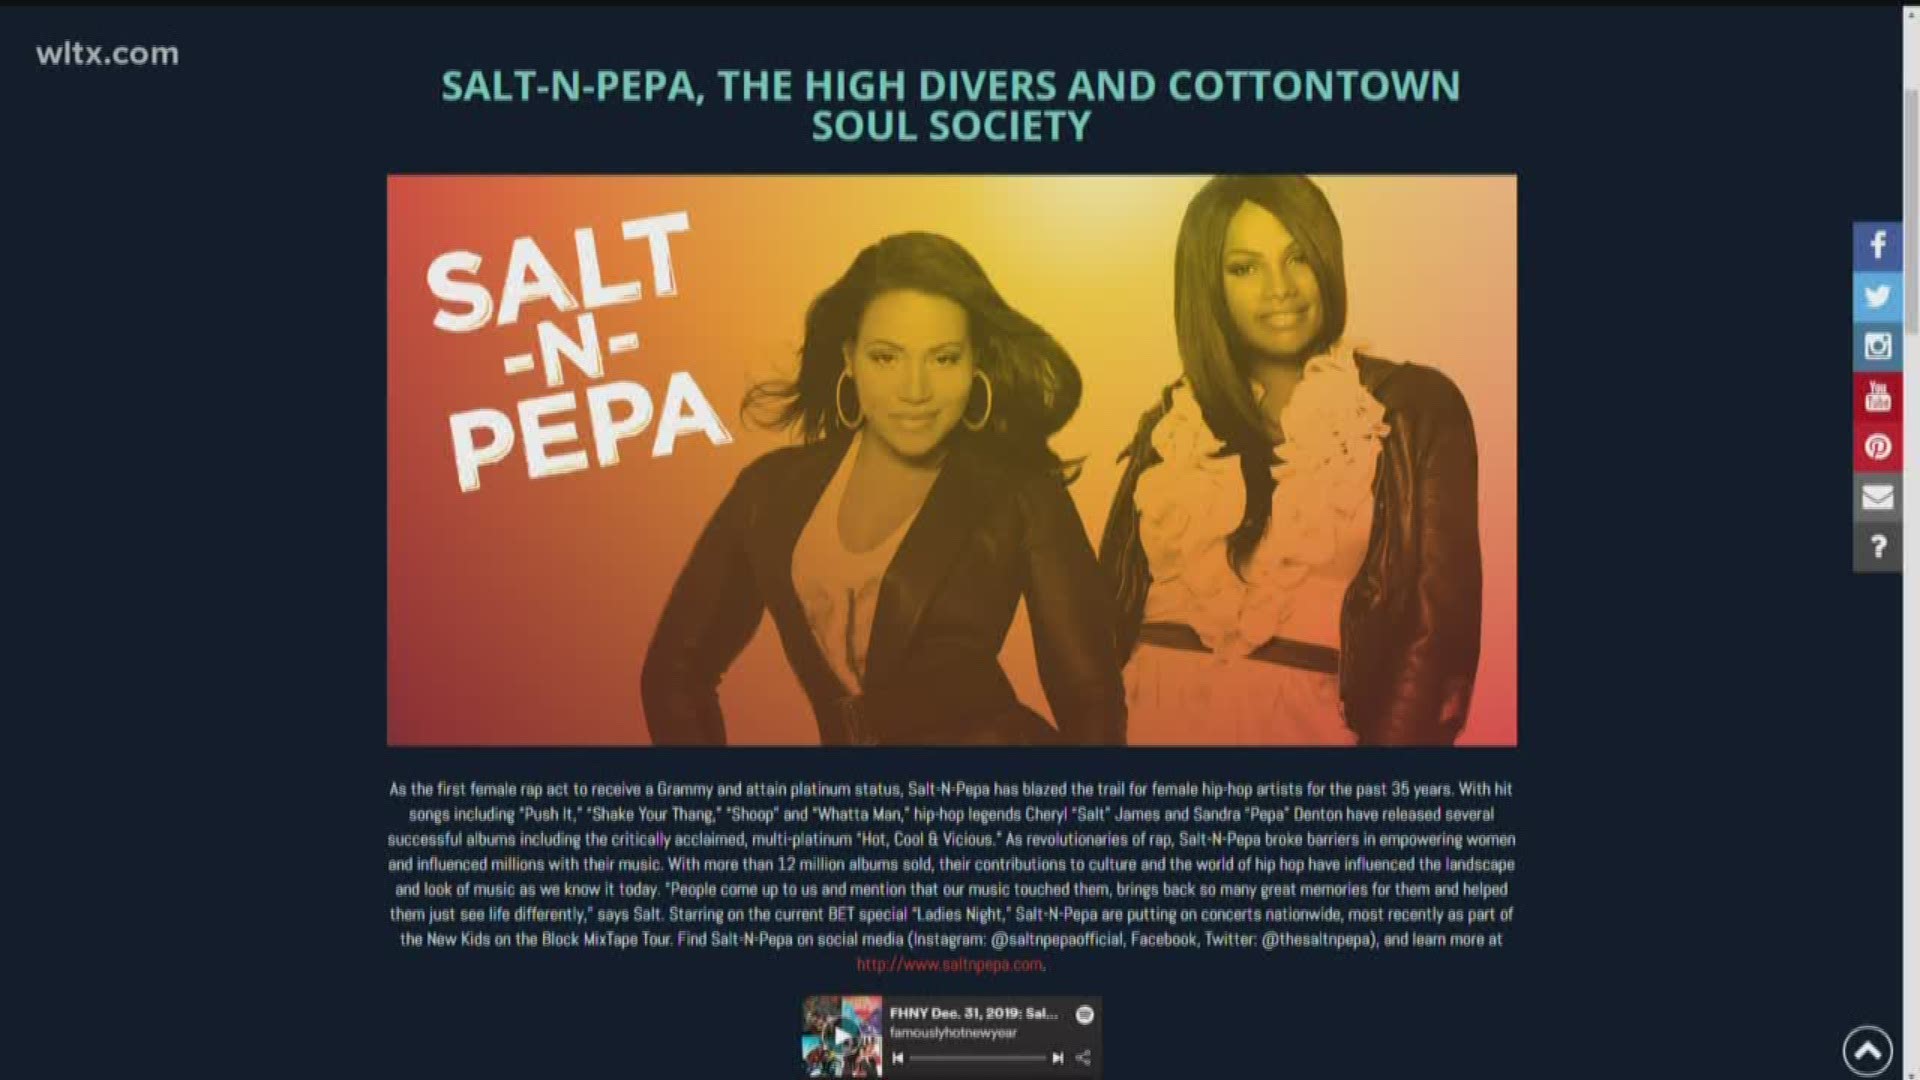 Salt-n-Pepa were the first female rap act to win a Grammy and produced hits such as "Push It," "Shoop," and "Whatta Man."